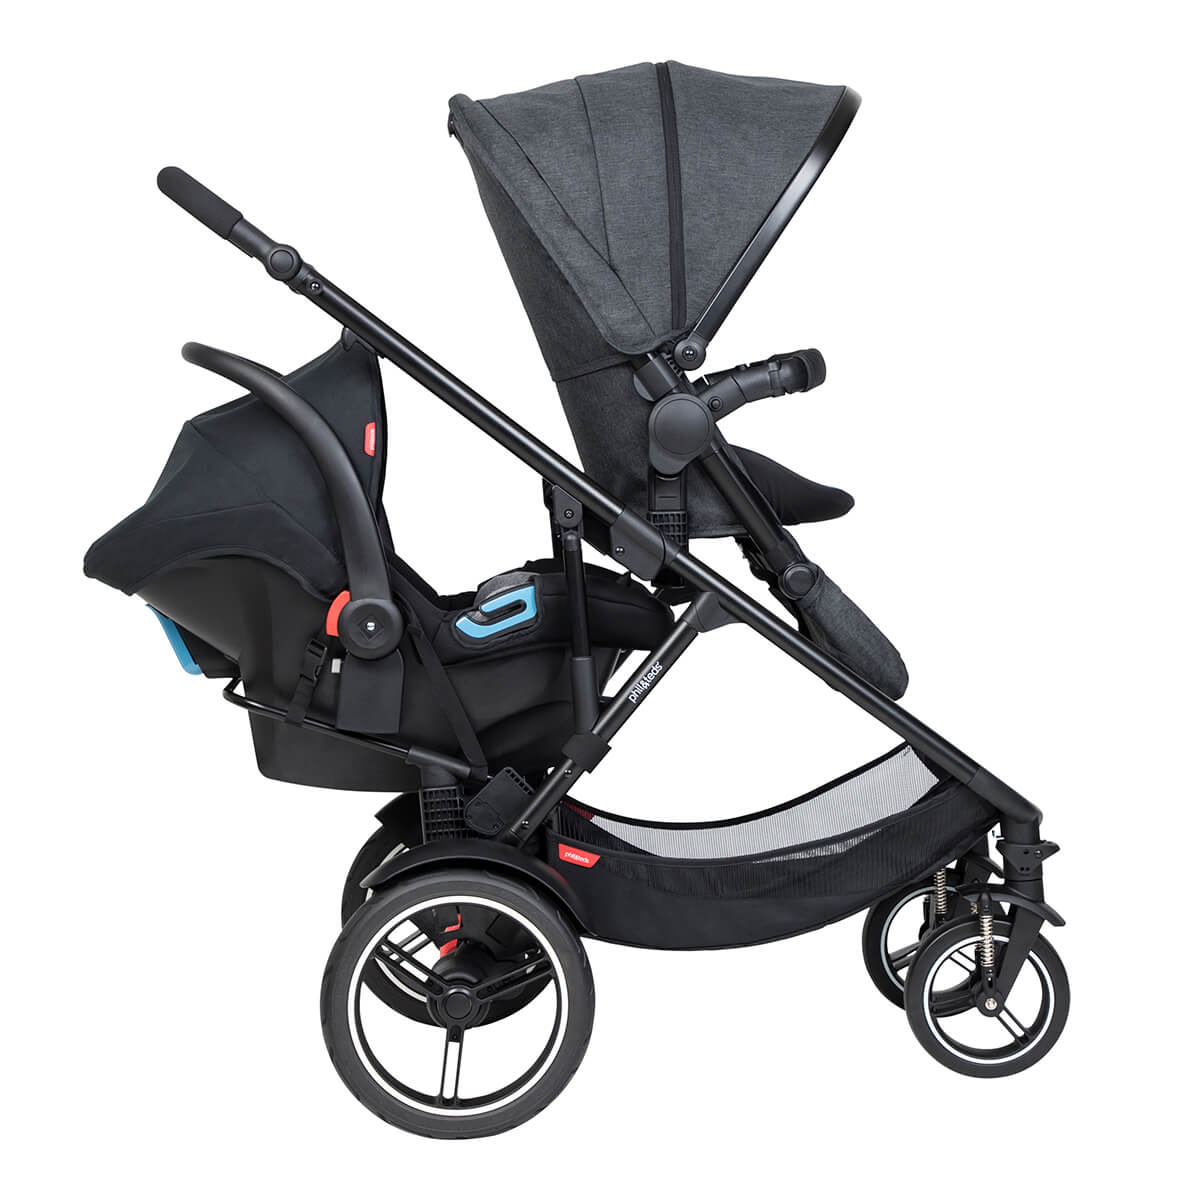 https://cdn.accentuate.io/4509529210968/19272668282968/philteds-voyager-buggy-in-forward-facing-mode-with-travel-system-in-the-rear-v1626484641578.jpg?1200x1200